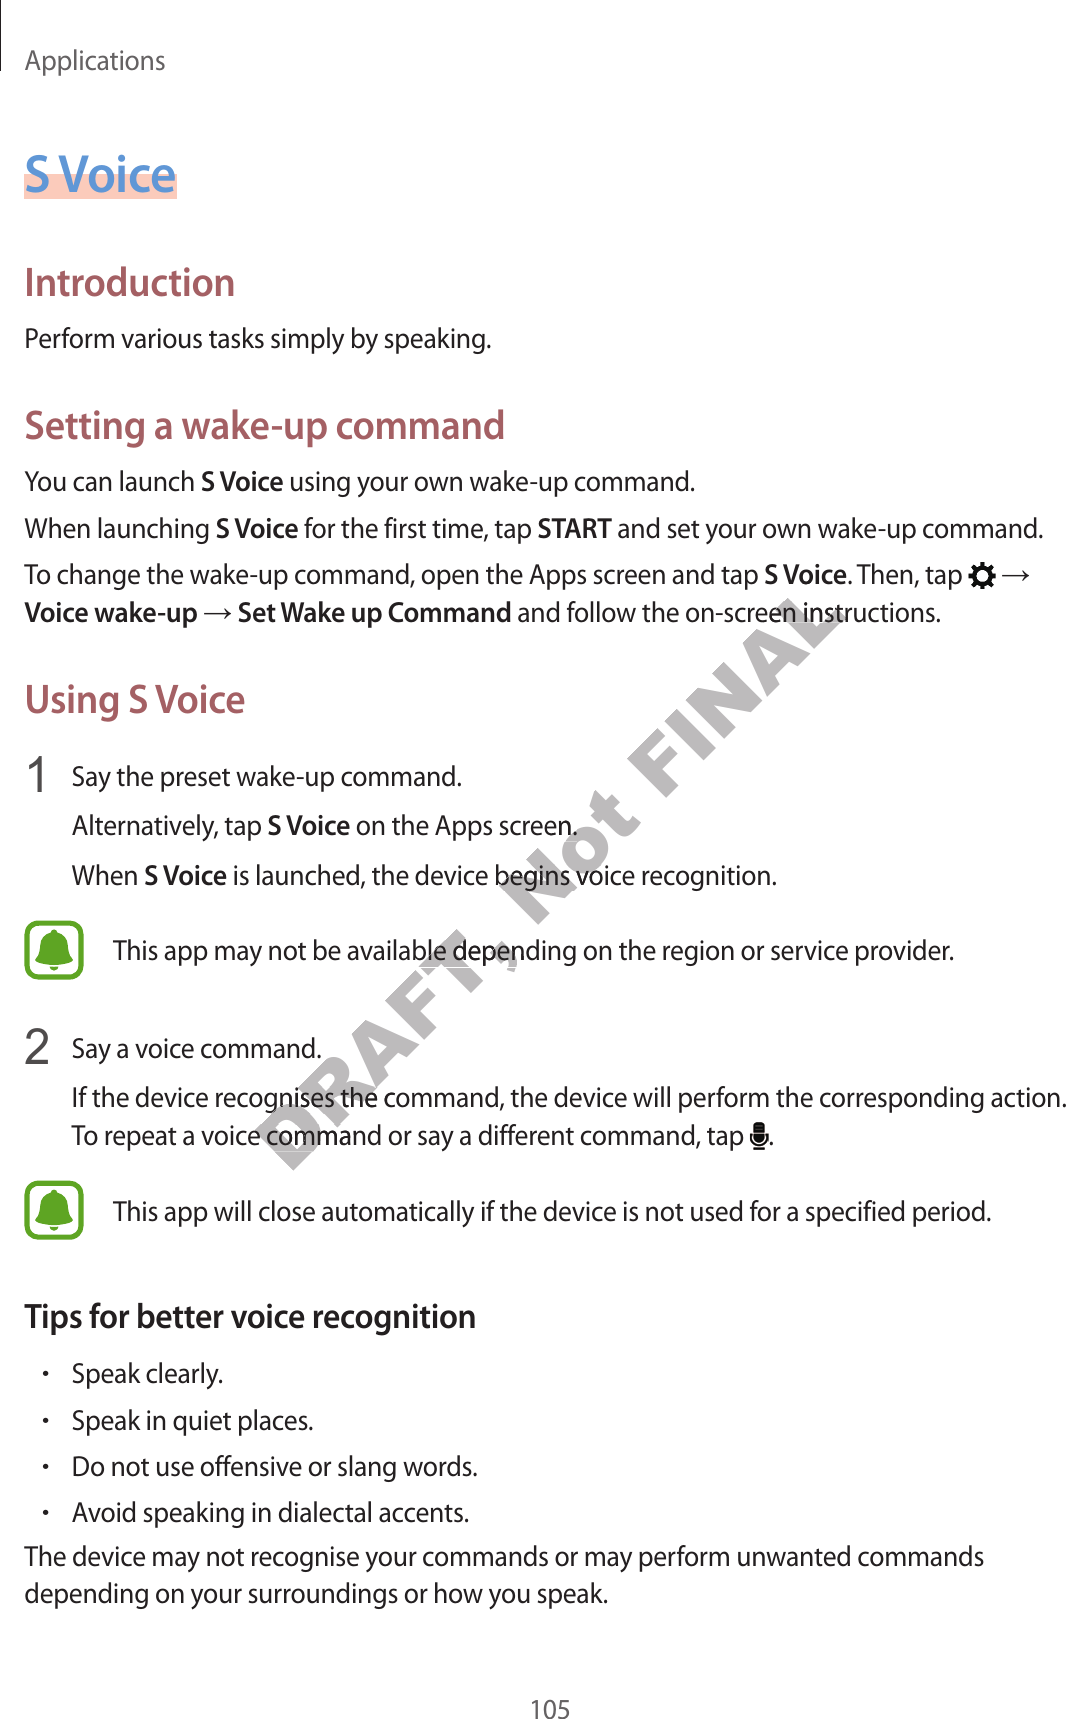 Applications105S VoiceIntroductionPerform various tasks simply by speaking.Setting a wake-up commandYou can launch S Voice using your own wake-up command.When launching S Voice for the first time, tap START and set your own wake-up command.To change the wake-up command, open the Apps screen and tap S Voice. Then, tap   ĺ Voice wake-up ĺ Set Wake up Command and follow the on-screen instructions.Using S Voice1  Say the preset wake-up command.Alternatively, tap S Voice on the Apps screen.When S Voice is launched, the device begins voice recognition.This app may not be available depending on the region or service provider.2  Say a voice command.If the device recognises the command, the device will perform the corresponding action. To repeat a voice command or say a different command, tap  .This app will close automatically if the device is not used for a specified period.Tips for better voice recognition•Speak clearly.•Speak in quiet places.•Do not use offensive or slang words.•Avoid speaking in dialectal accents.The device may not recognise your commands or may perform unwanted commands depending on your surroundings or how you speak.DRAFT, ailable depending on the railable depending on the rommand.ommand.ognises the commandognises the coice command or saoice command or saNot pps screen.een.e begins voice begins voicFINALS Voicw the on-screen instrucw the on-screen instruc